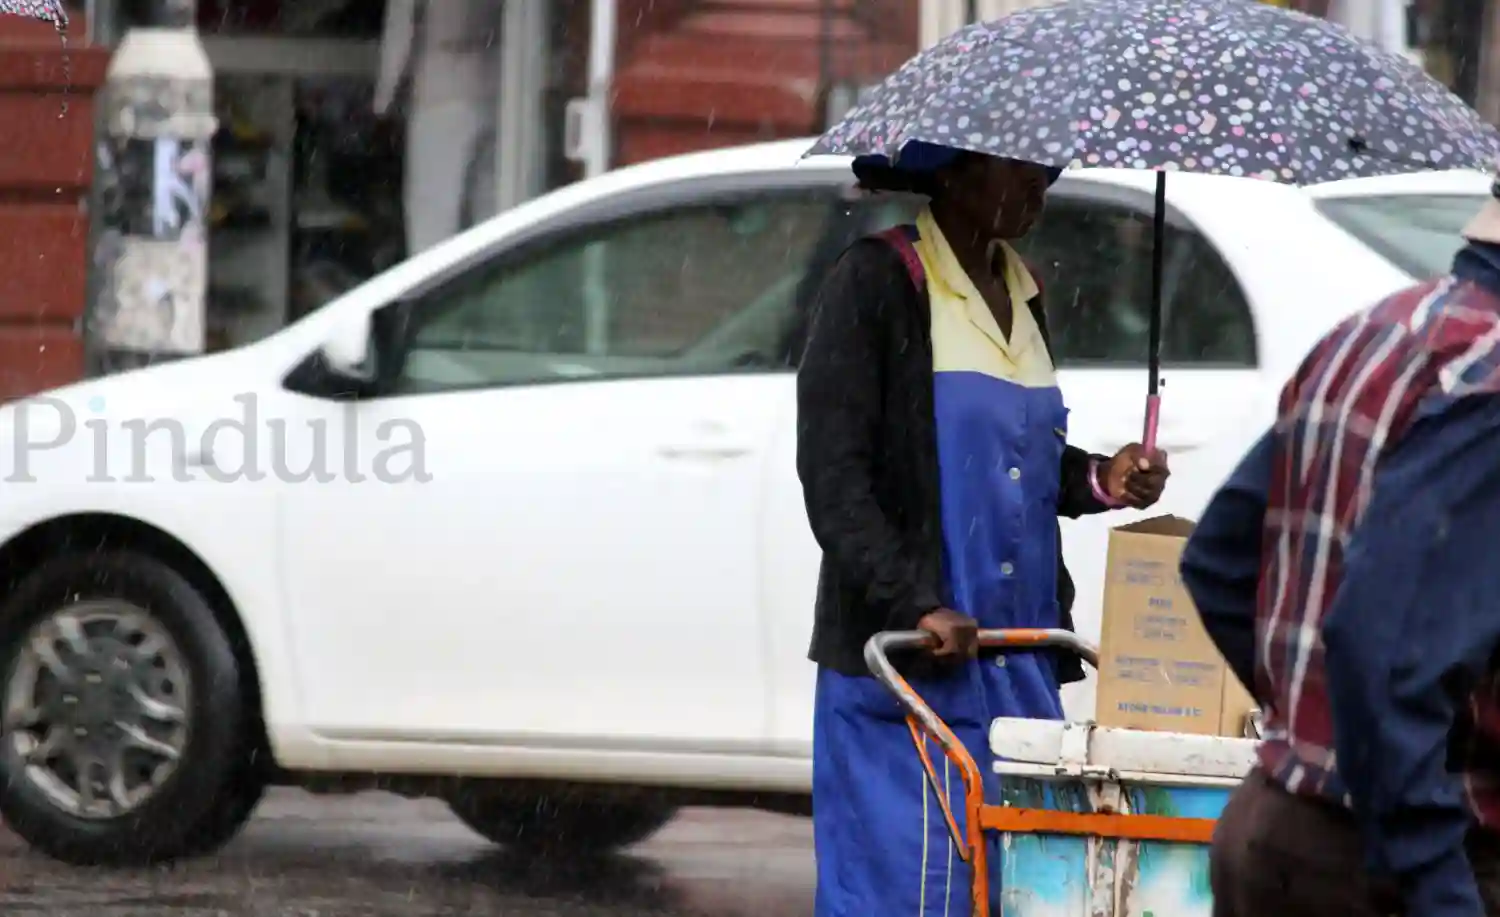 Heavy Rains, Violent Thunderstorms And Possible Flash Floods Expected In Zimbabwe Starting Tonight - MSD